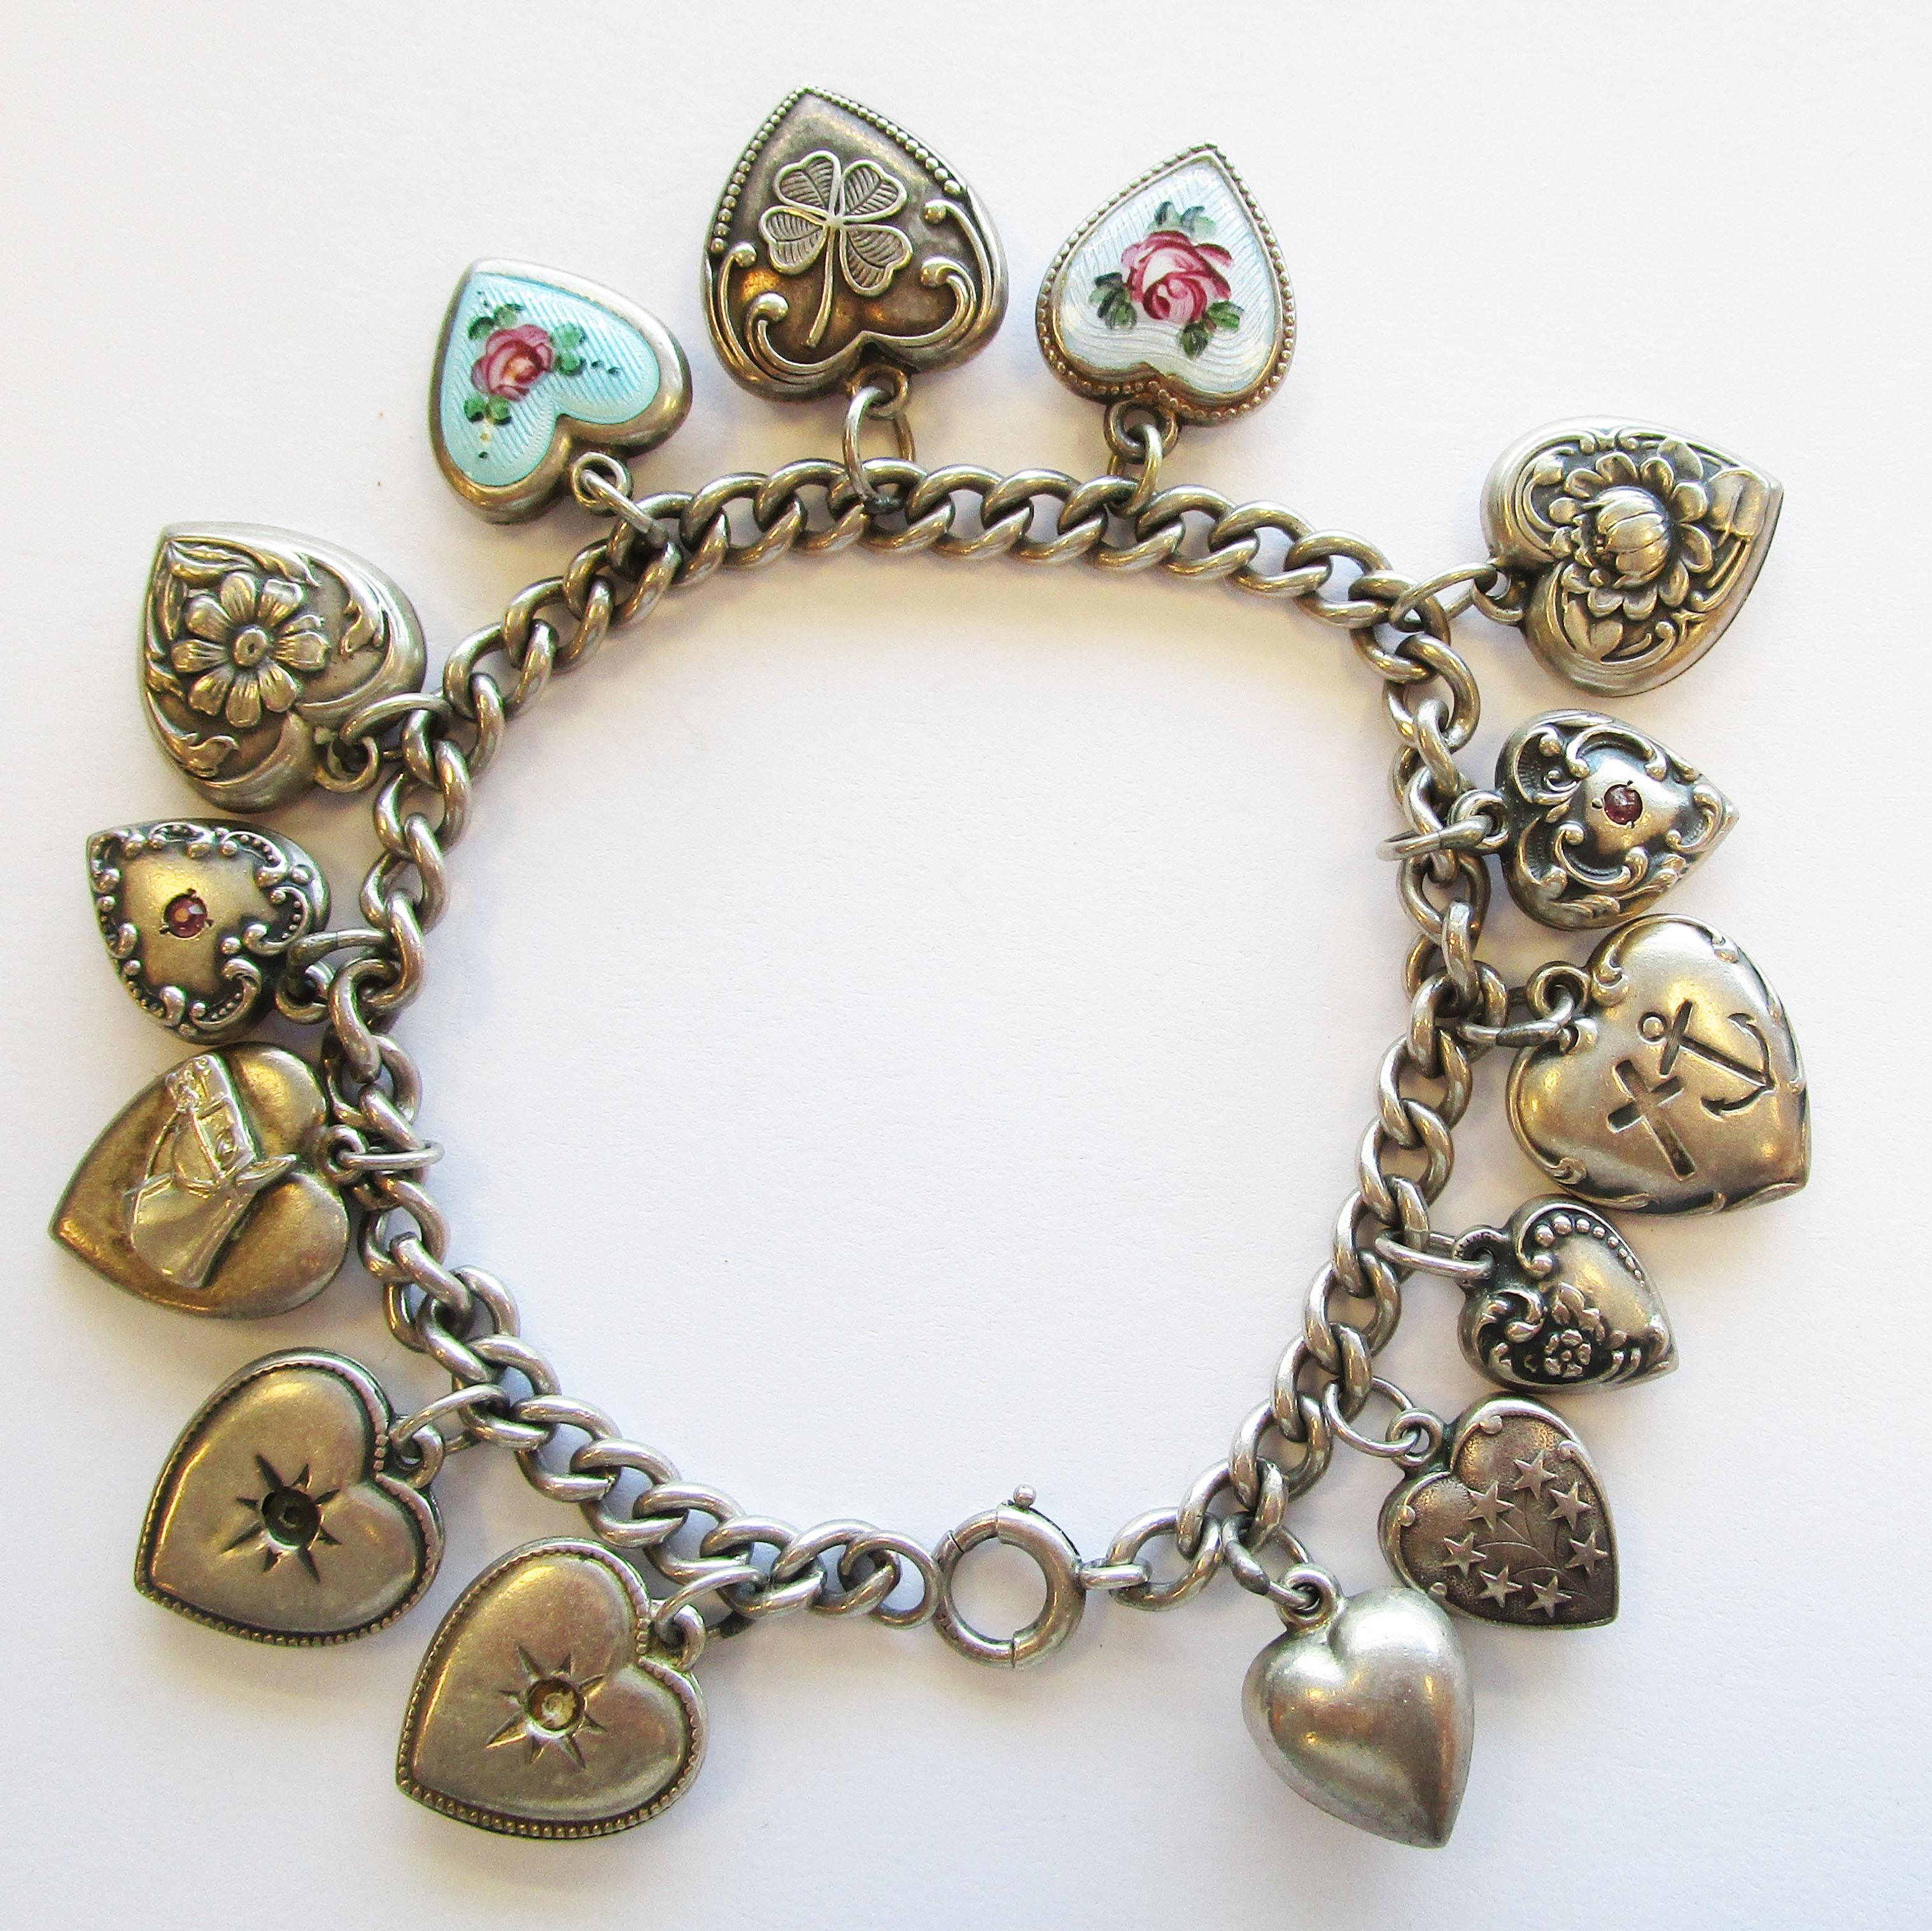 This is a beautiful vintage sterling silver puffy heart charm bracelet from the Art Deco era. The bracelet has a total of fourteen beautiful heart charms, two of which are enameled with gorgeous flowers! This is the perfect bracelet for someone who